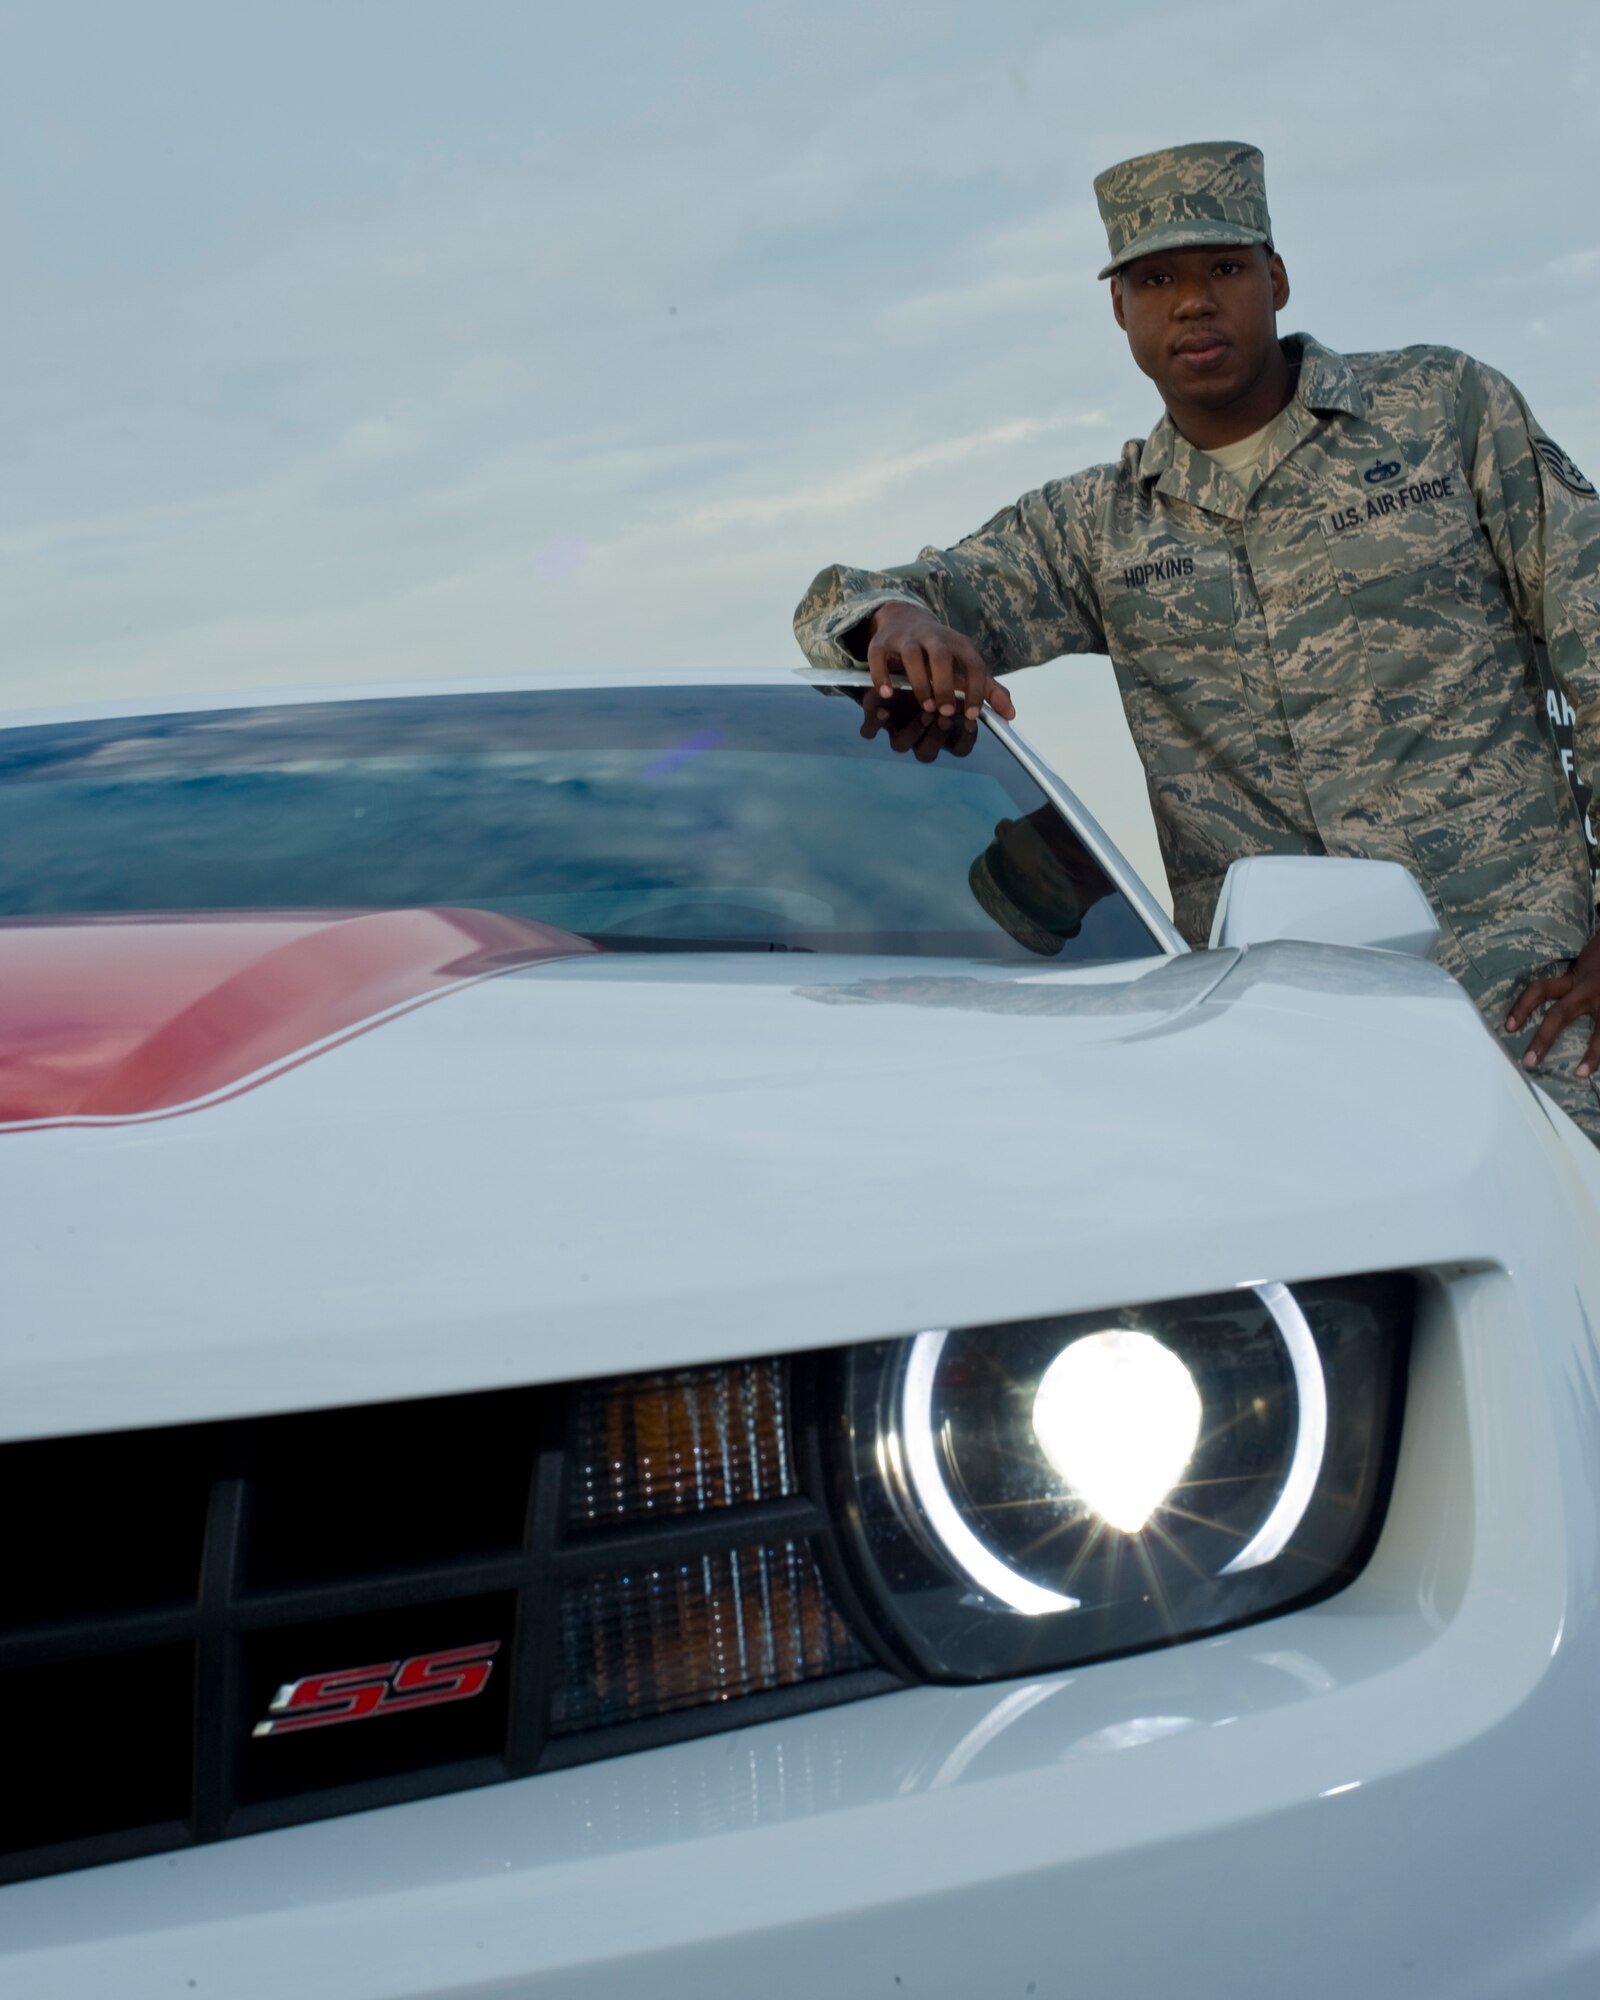 U.S. Air Force Staff Sgt. Dwayne Hopkins, a unit deployment manager with 1st Special Operations Logistics Readiness Squadron, stands next to his Camaro SS on Hurlburt Field Fla., Oct. 3, 2012. He is a member of the Airman to Airman Saftey Advisory Council; Hopkins has been briefing a safety message based on the lessons he learned after a motorcycle accident. (U.S. Air Force Photo / Staff Sgt. John Bainter)